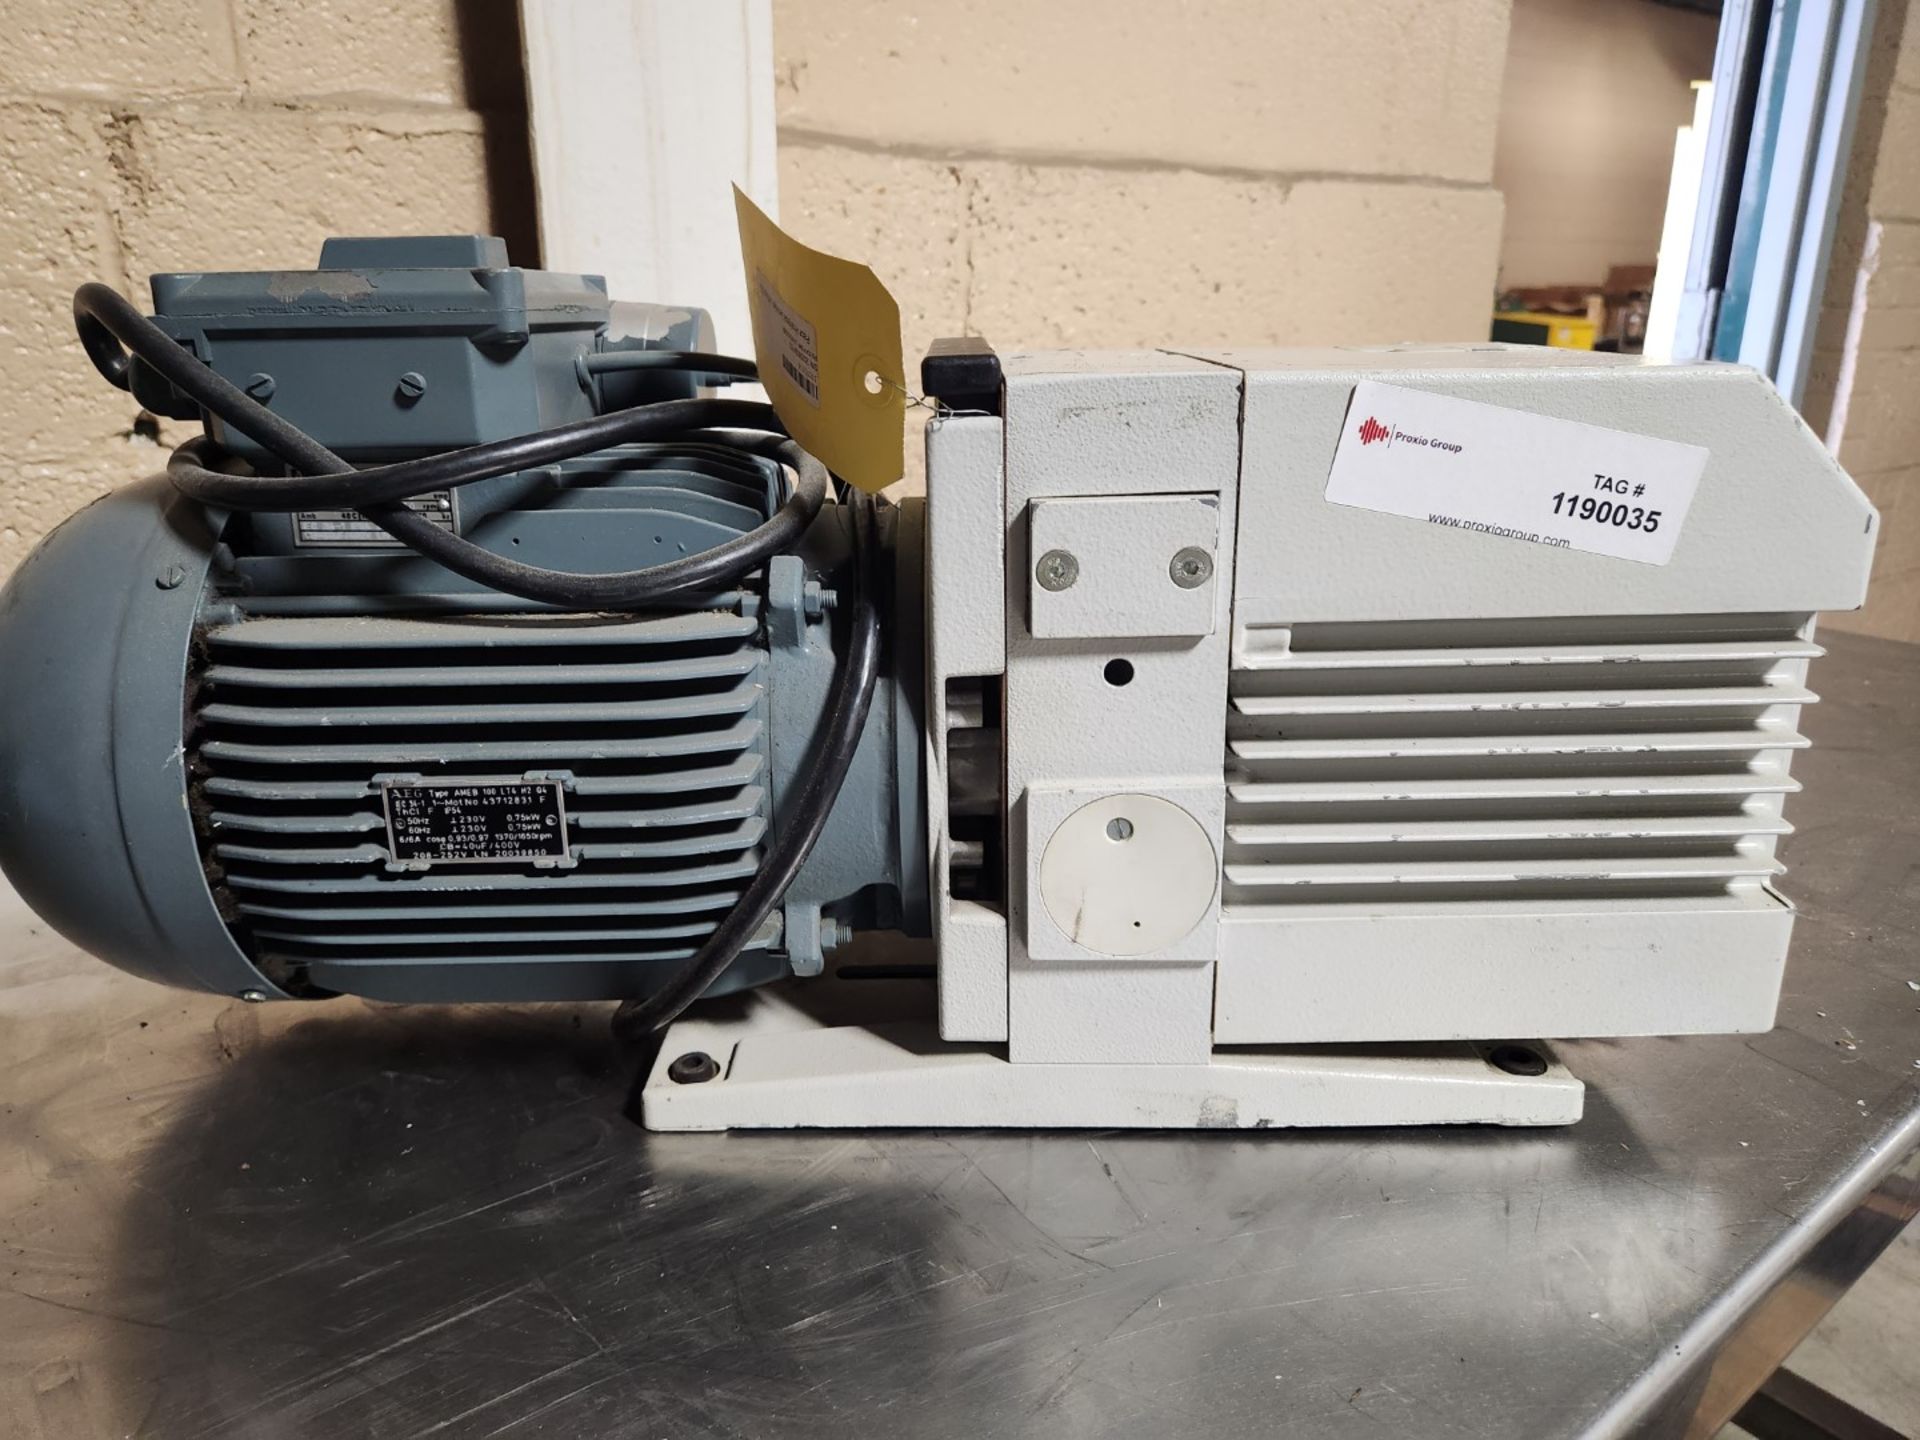 Leybold Trivac vacuum pump, type S25B, 1 hp, rated 25 cubic meters per hour, 120 volts, serial#